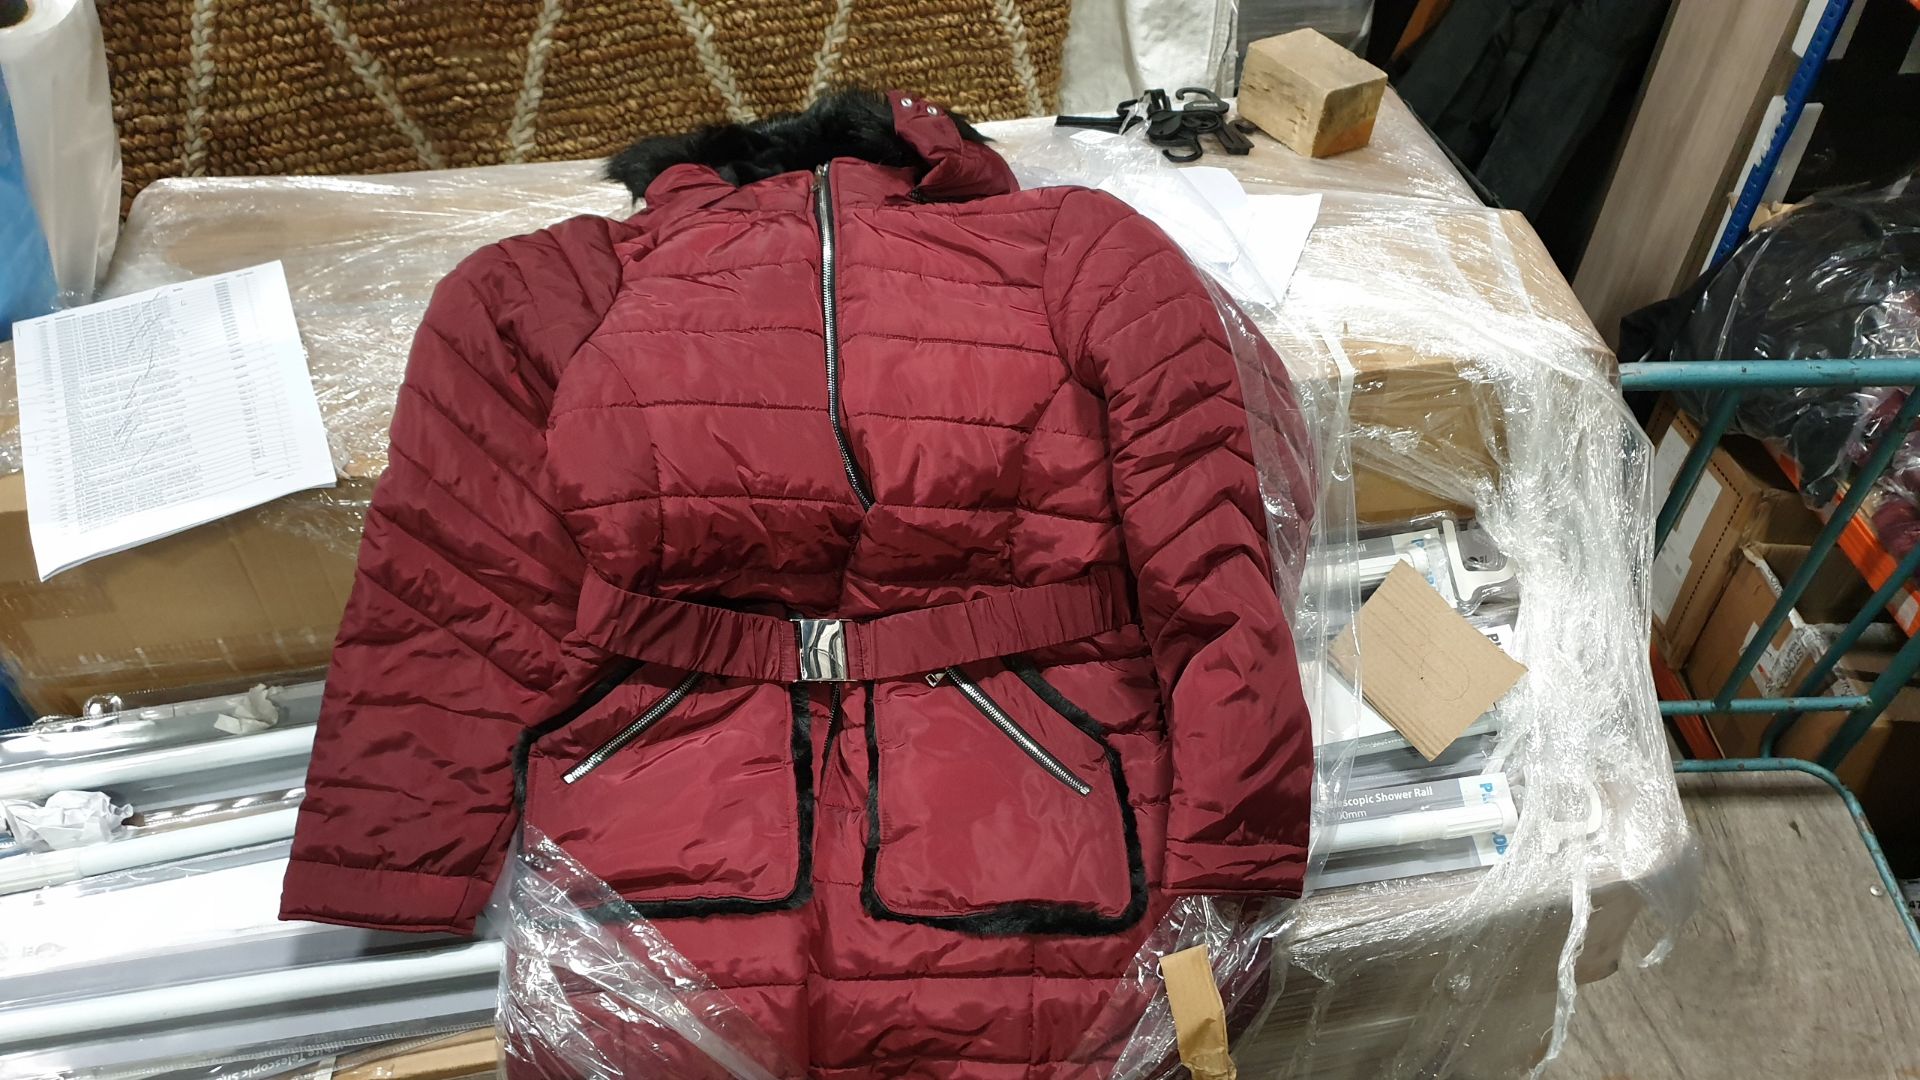 4 X BRAND NEW CAPSULE RED WINE JACKET WITH 8 X BRAND NEW ATMOSPHERE TURTLE NECK JUMPERS